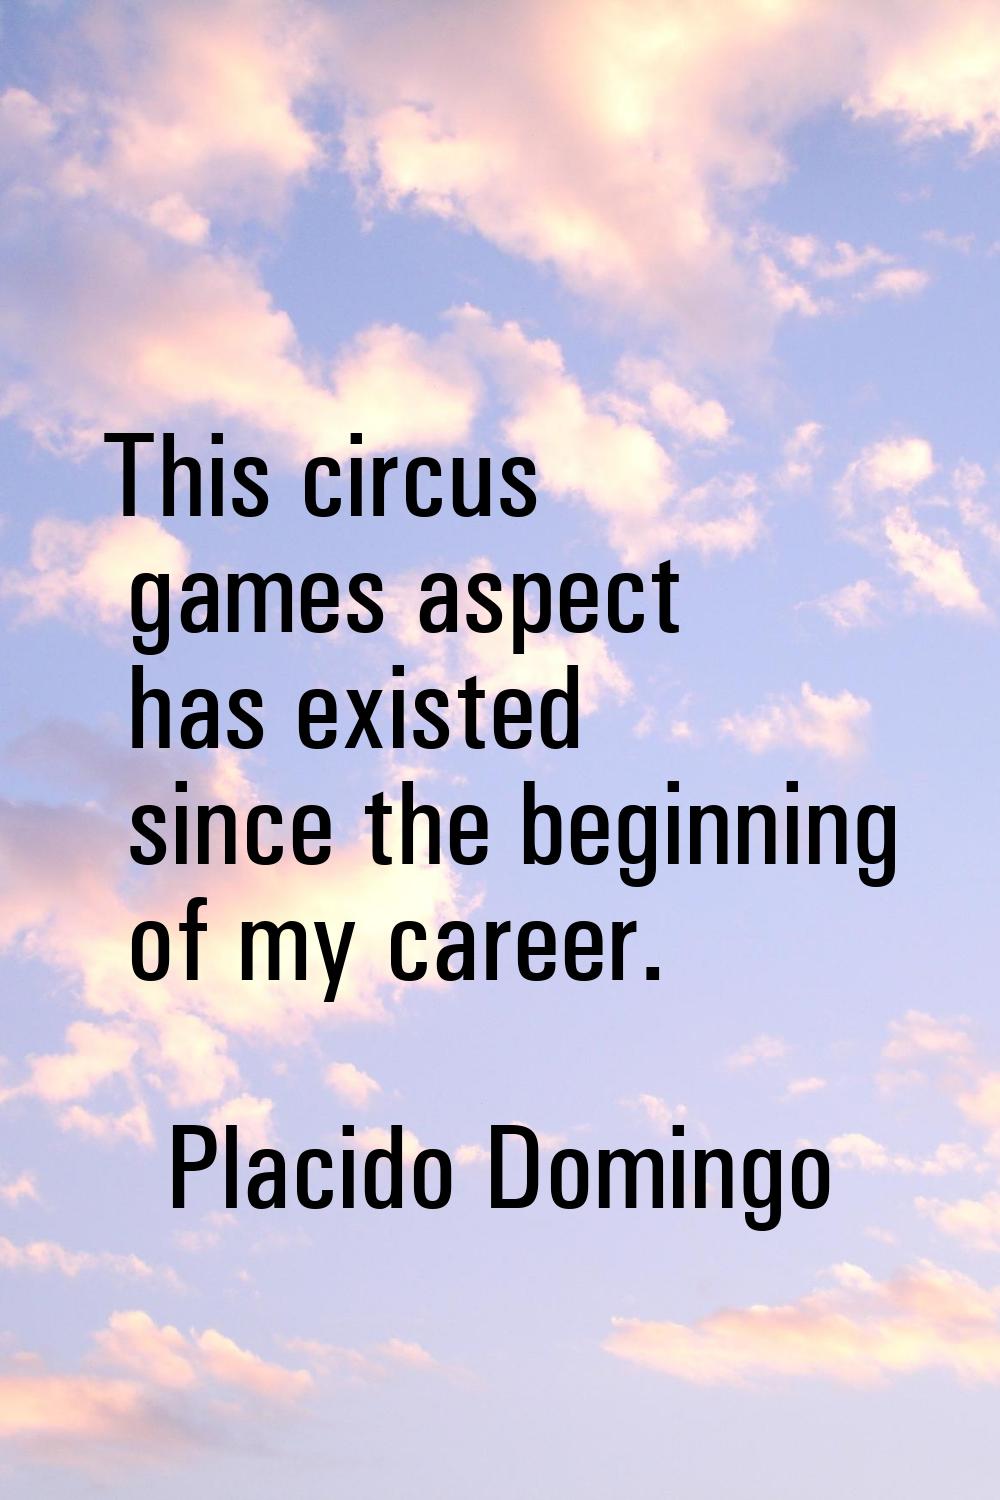 This circus games aspect has existed since the beginning of my career.